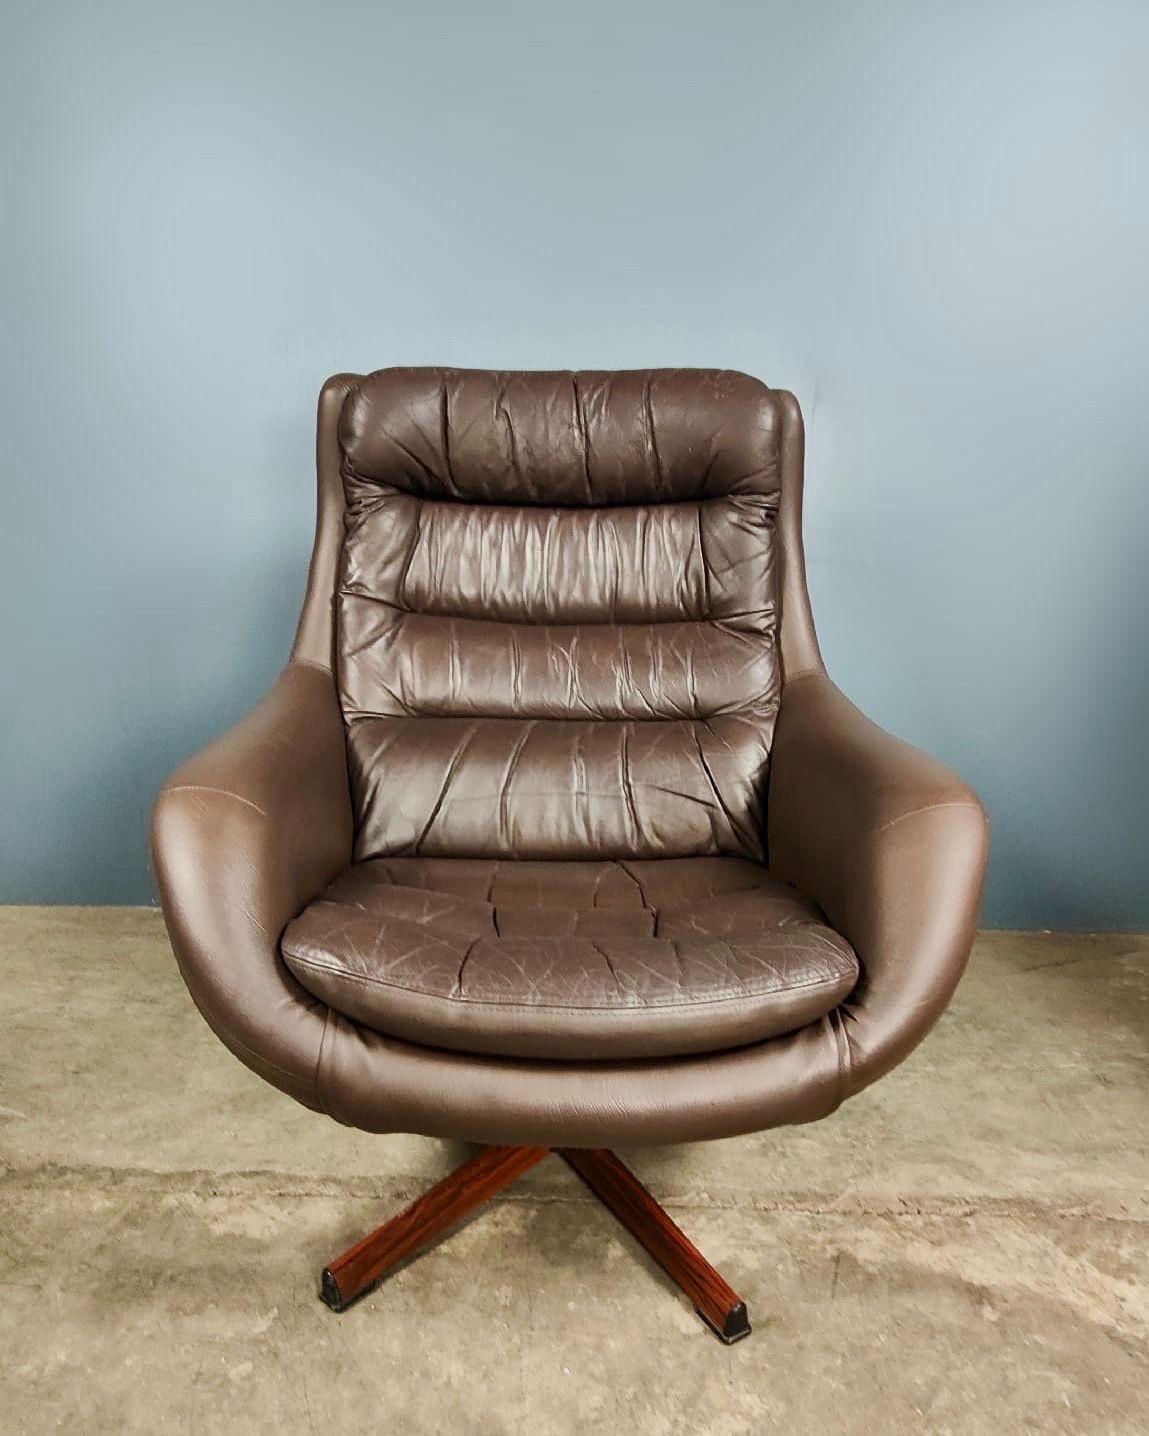 New Stock ✅

Brown Leather Mid Century Overman Swedish Swivel Lounge Chair Retro Vintage MCM

Beautiful stylish and comfy swivel chair dating from the 1970s. Brown leather upholstery in great condition, lifted on a 5 pointed star wooden